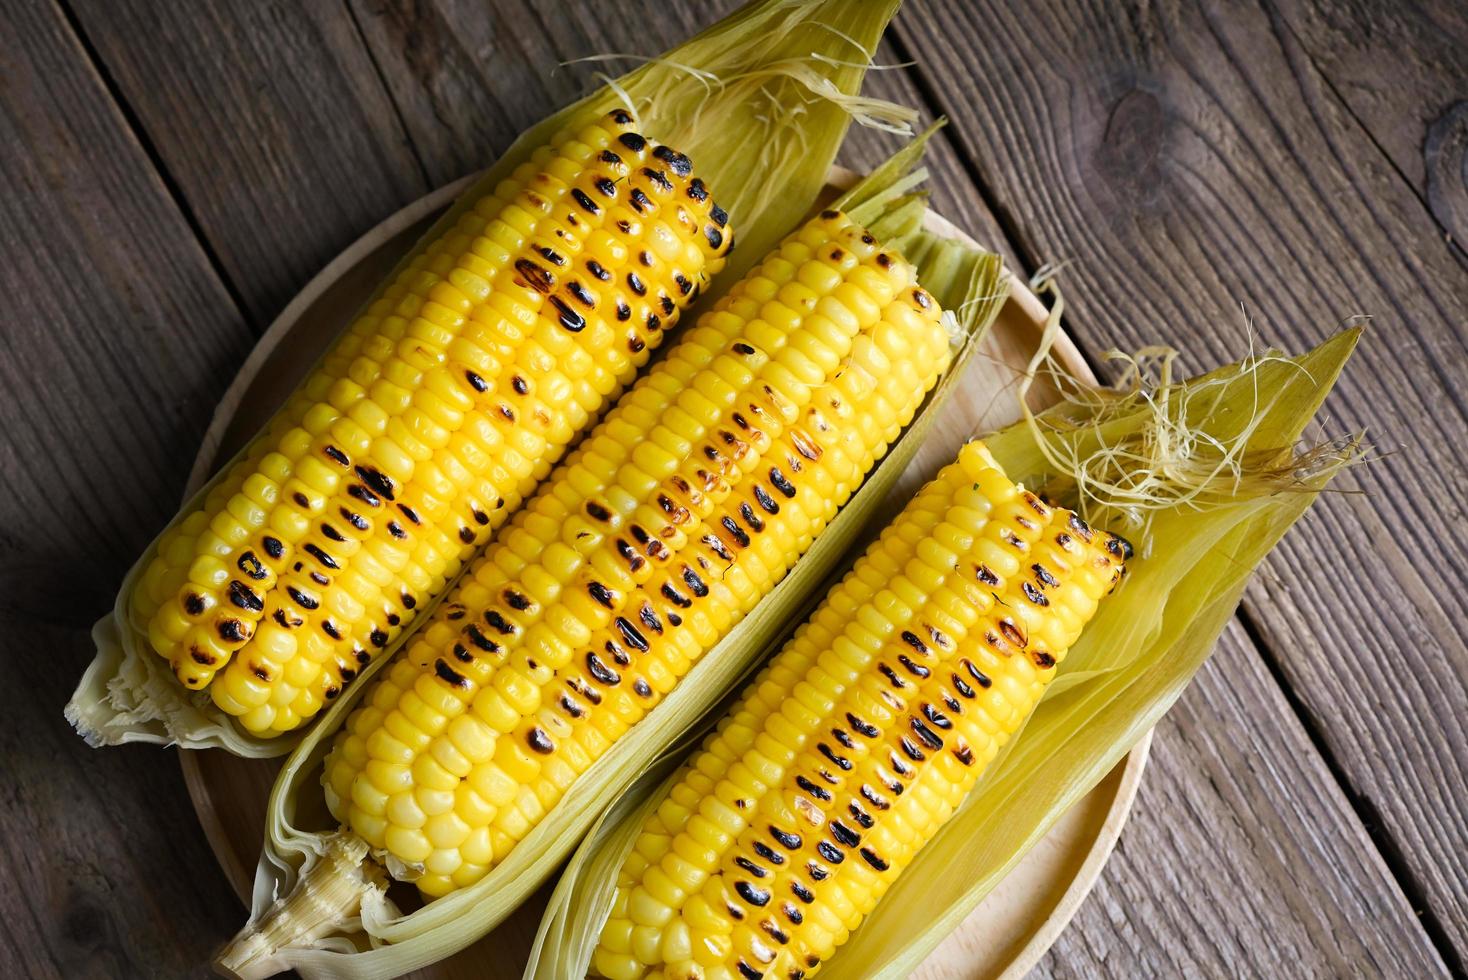 sweet corn food , sweet corn cooked on wooden plate background, ripe corn cobs grilled sweetcorn for food vegan dinner or snack - top view photo